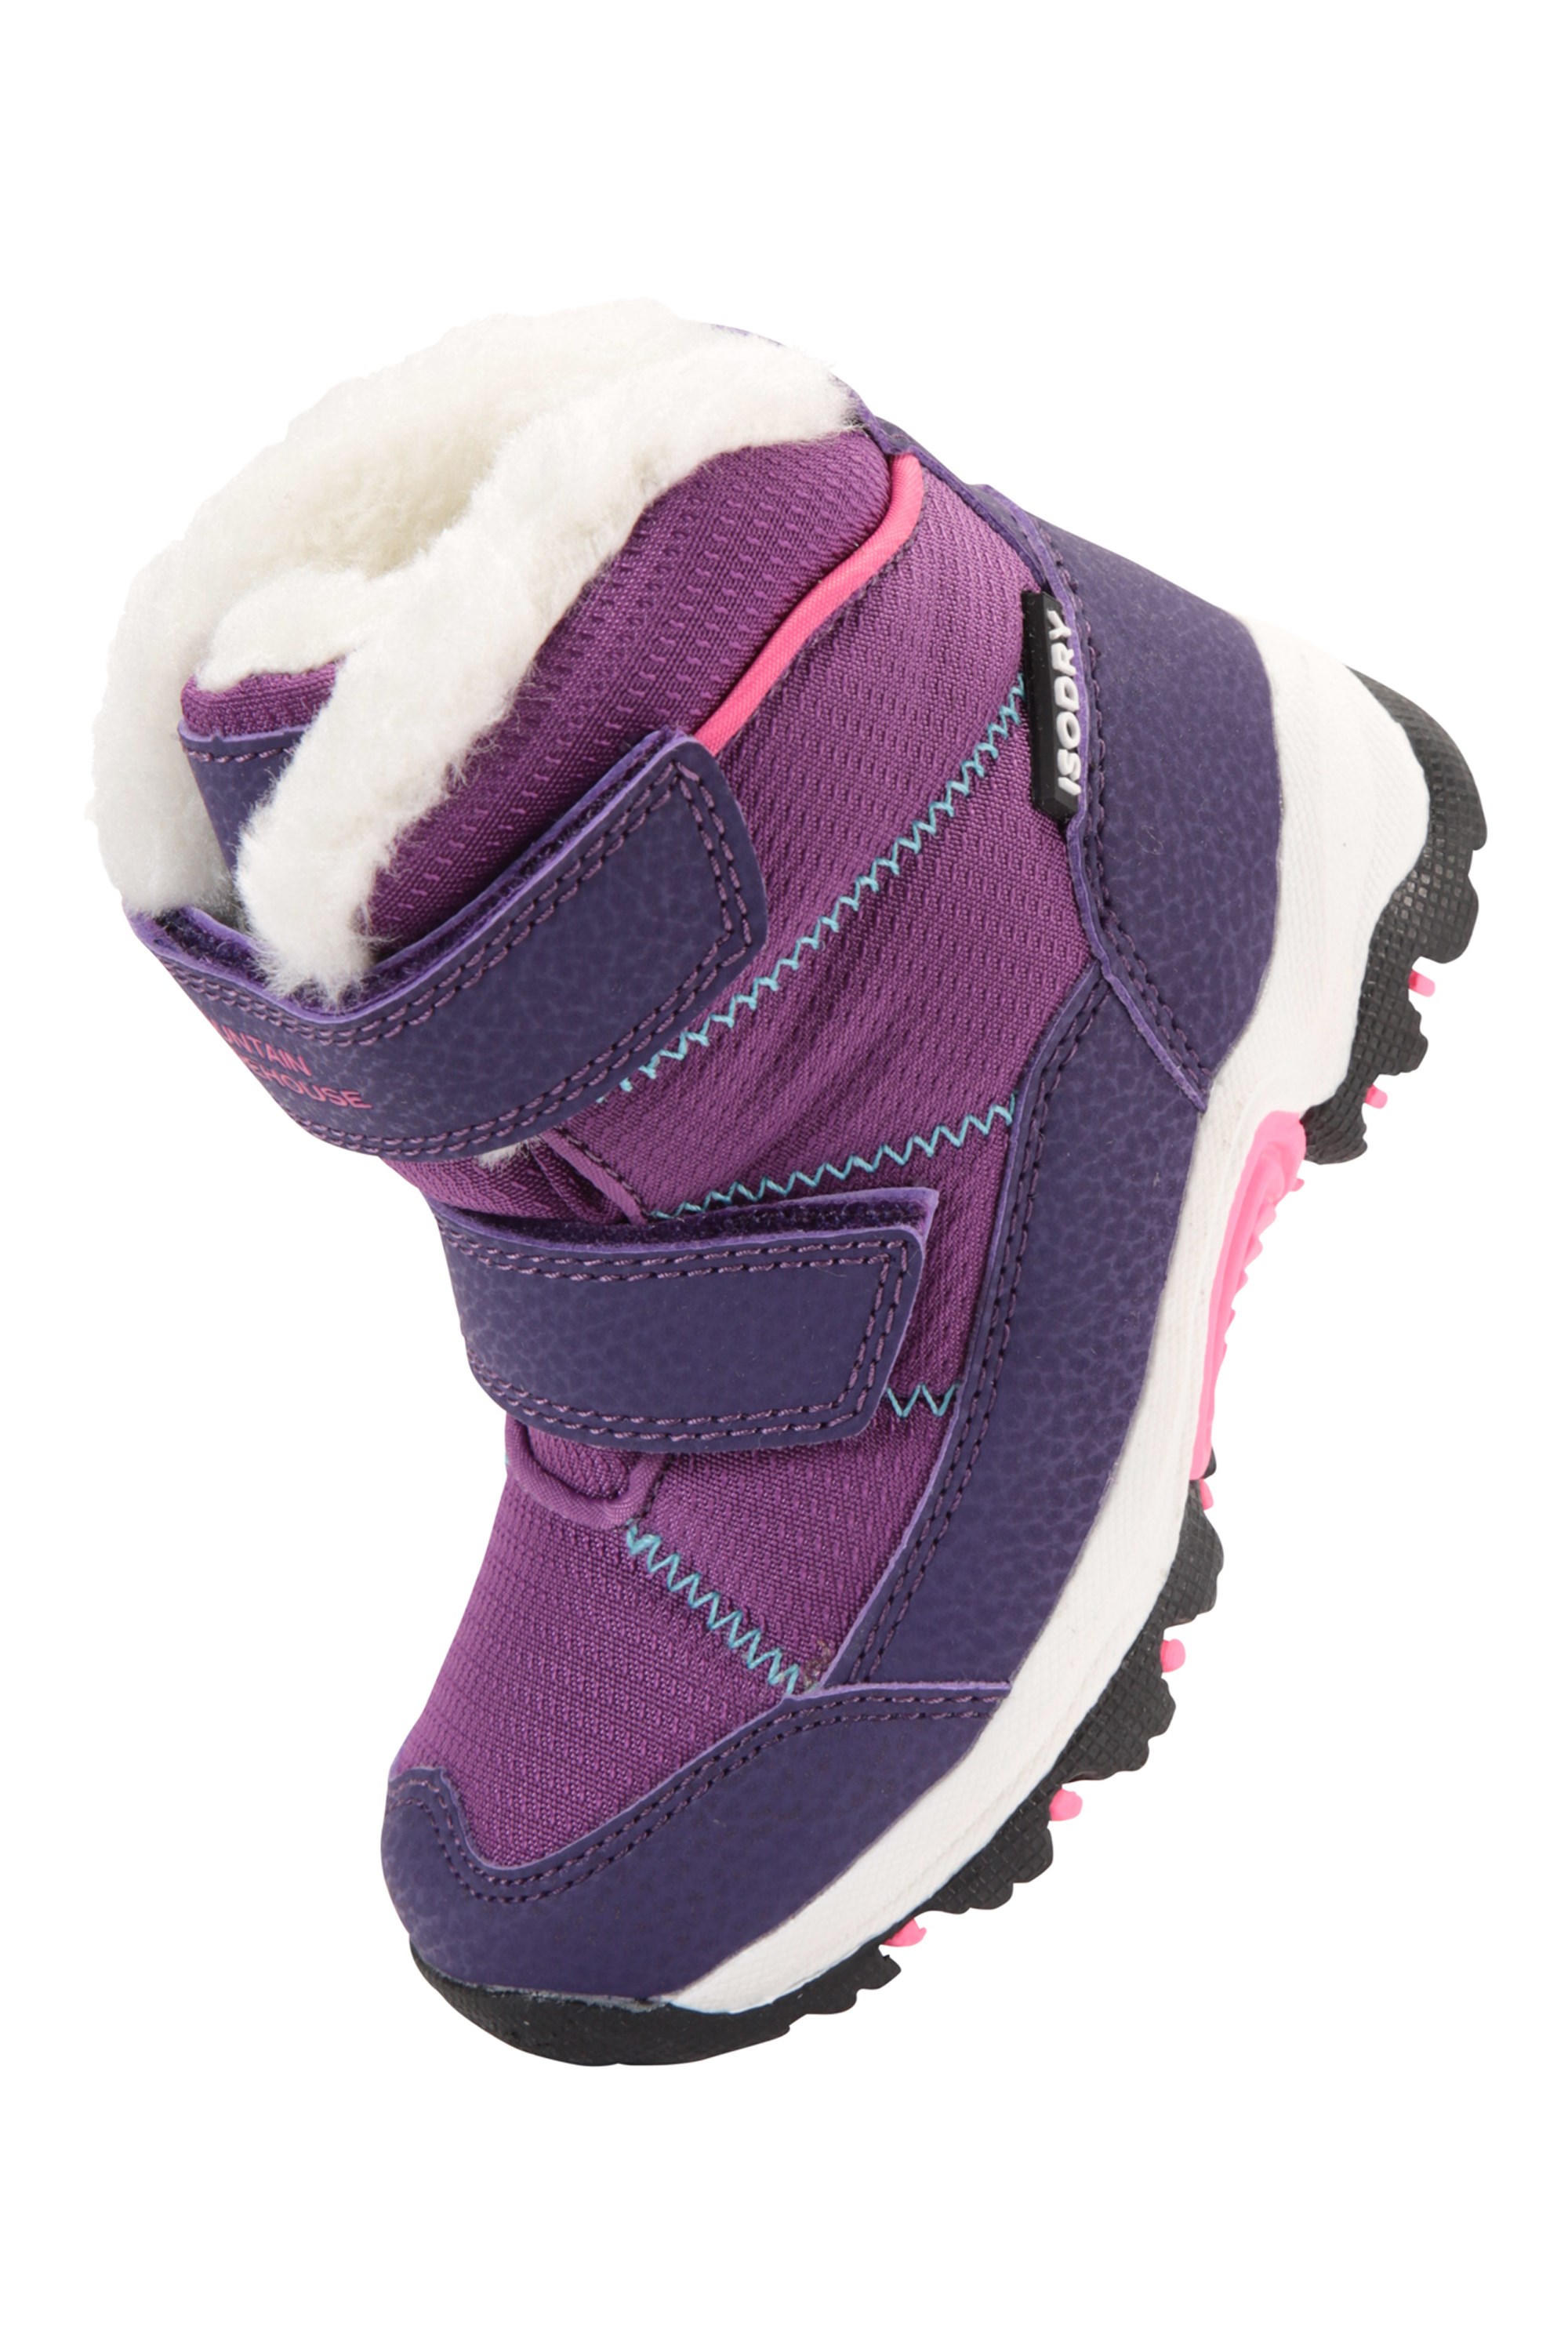 mountain warehouse childrens snow boots